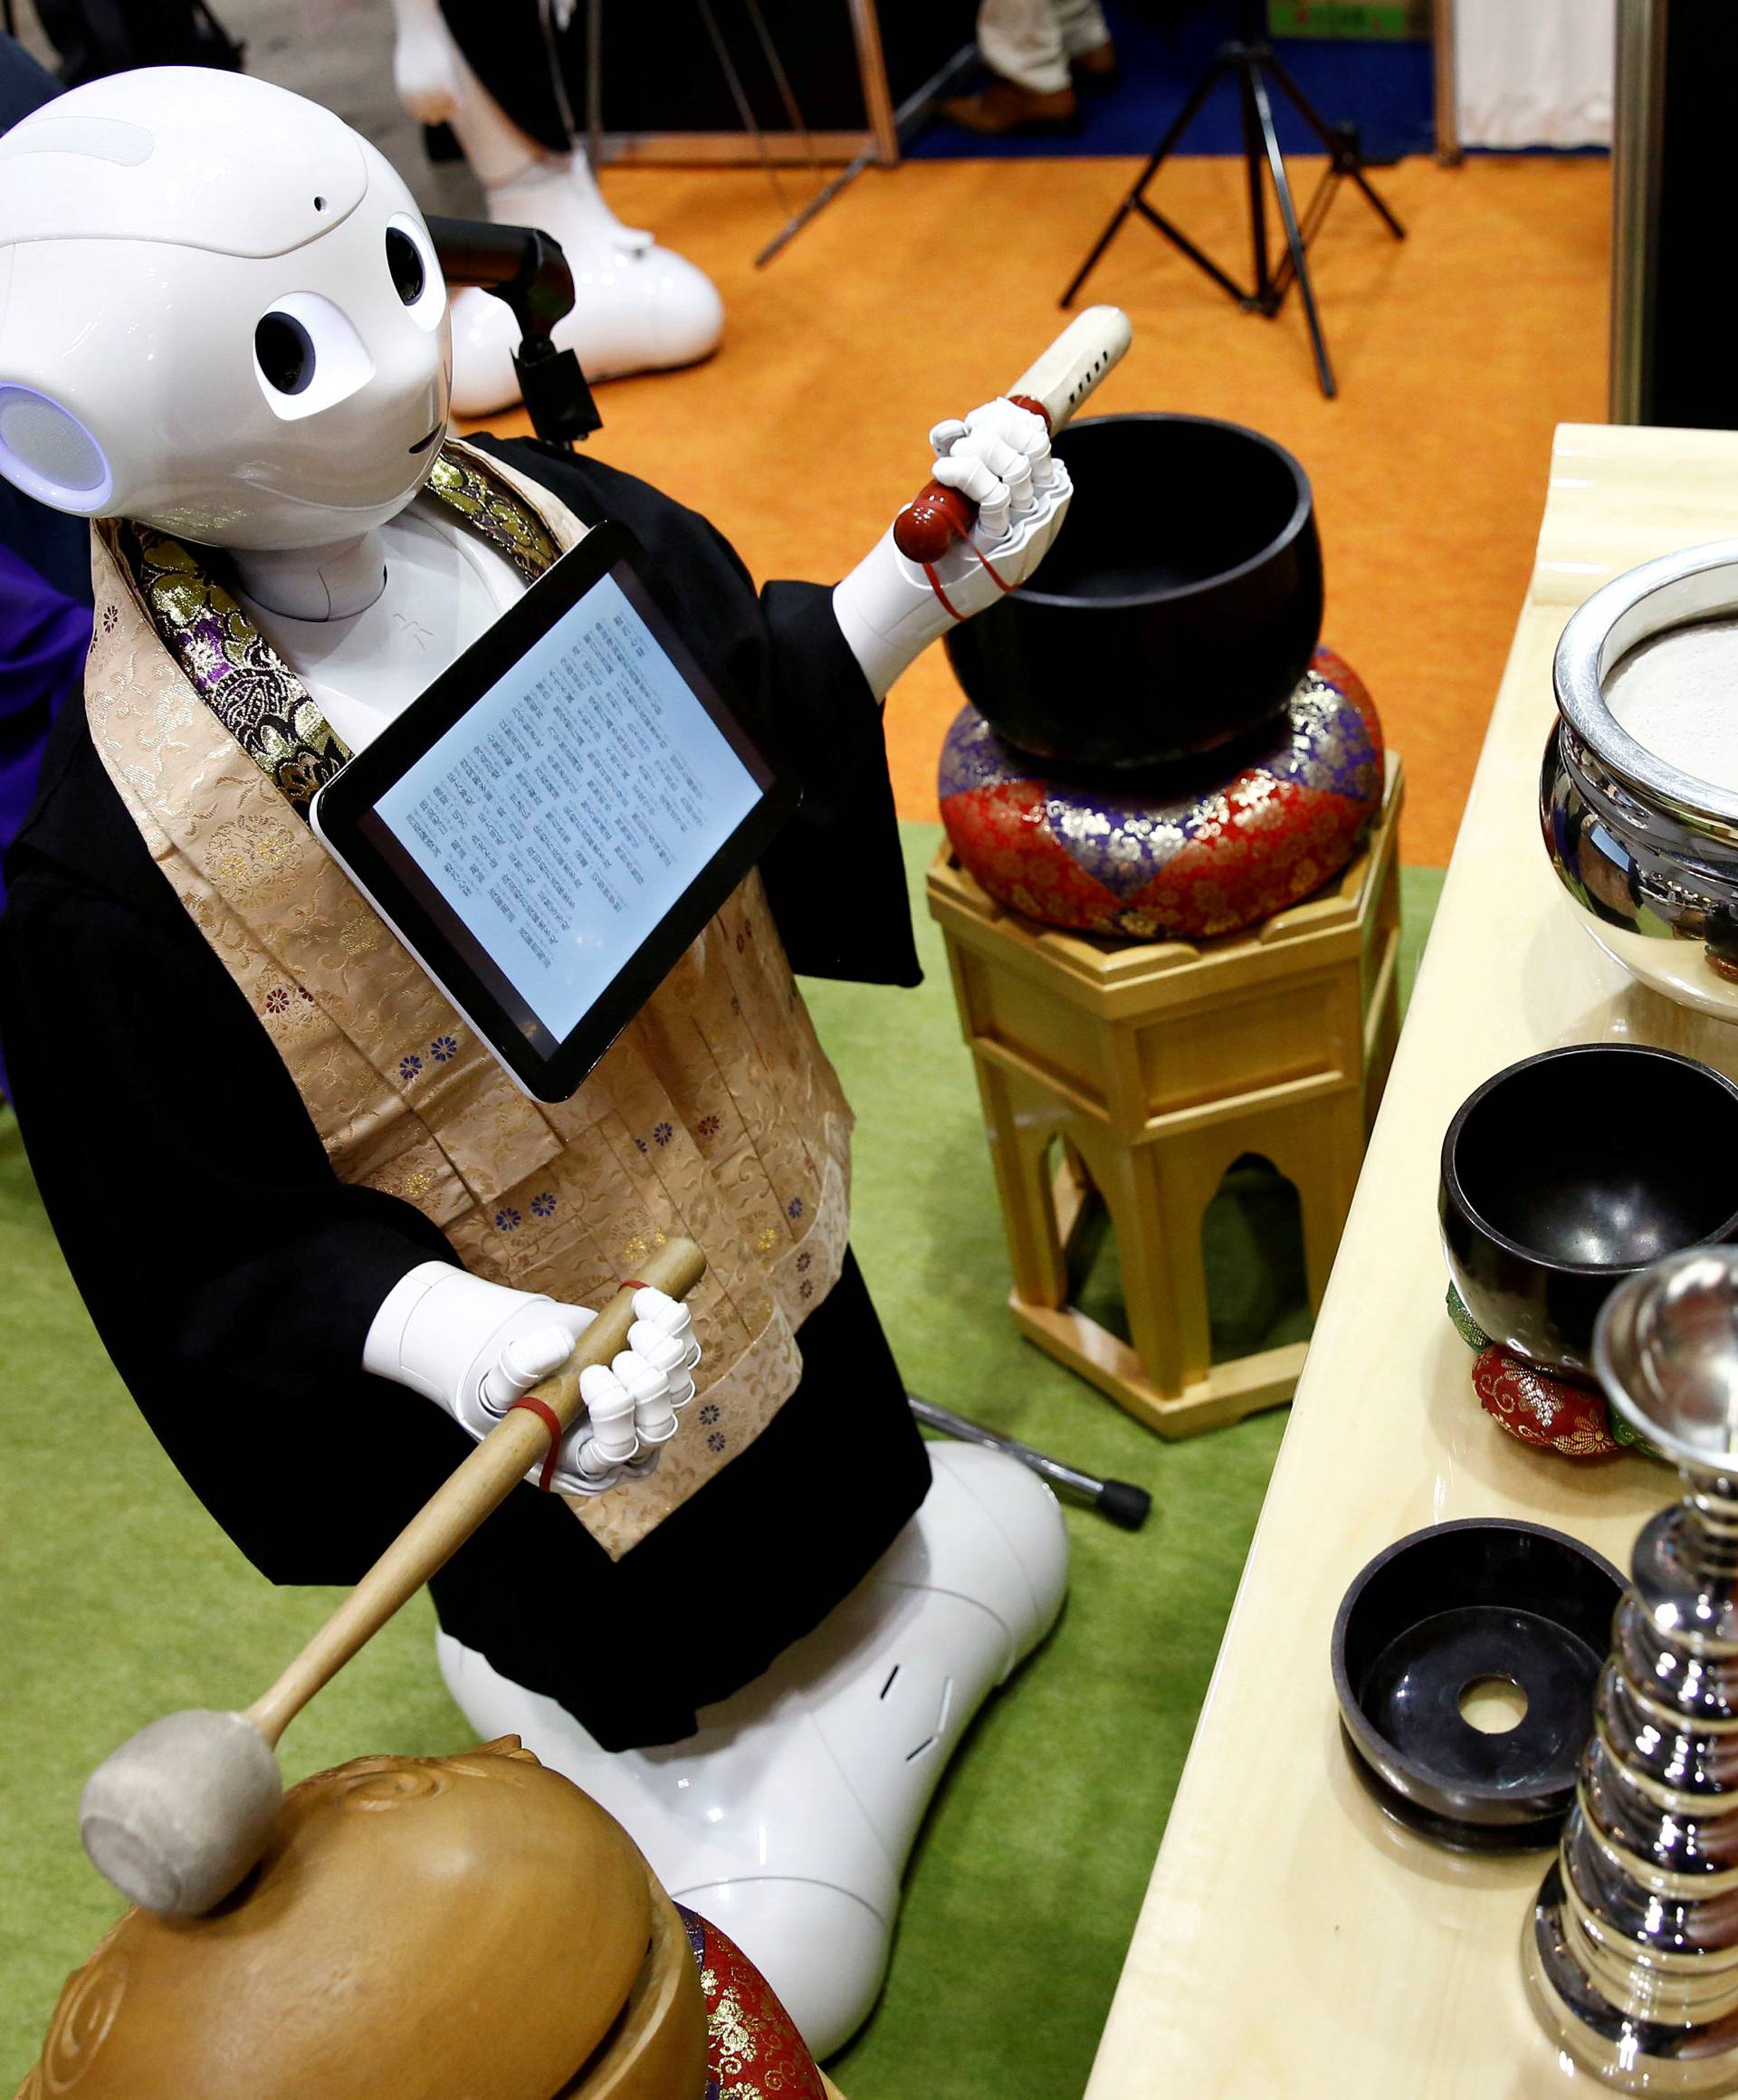 A 'robot priest' wearing a Buddhist robe chants sutras during its demonstration at Life Ending Industry EXPO 2017 in Tokyo